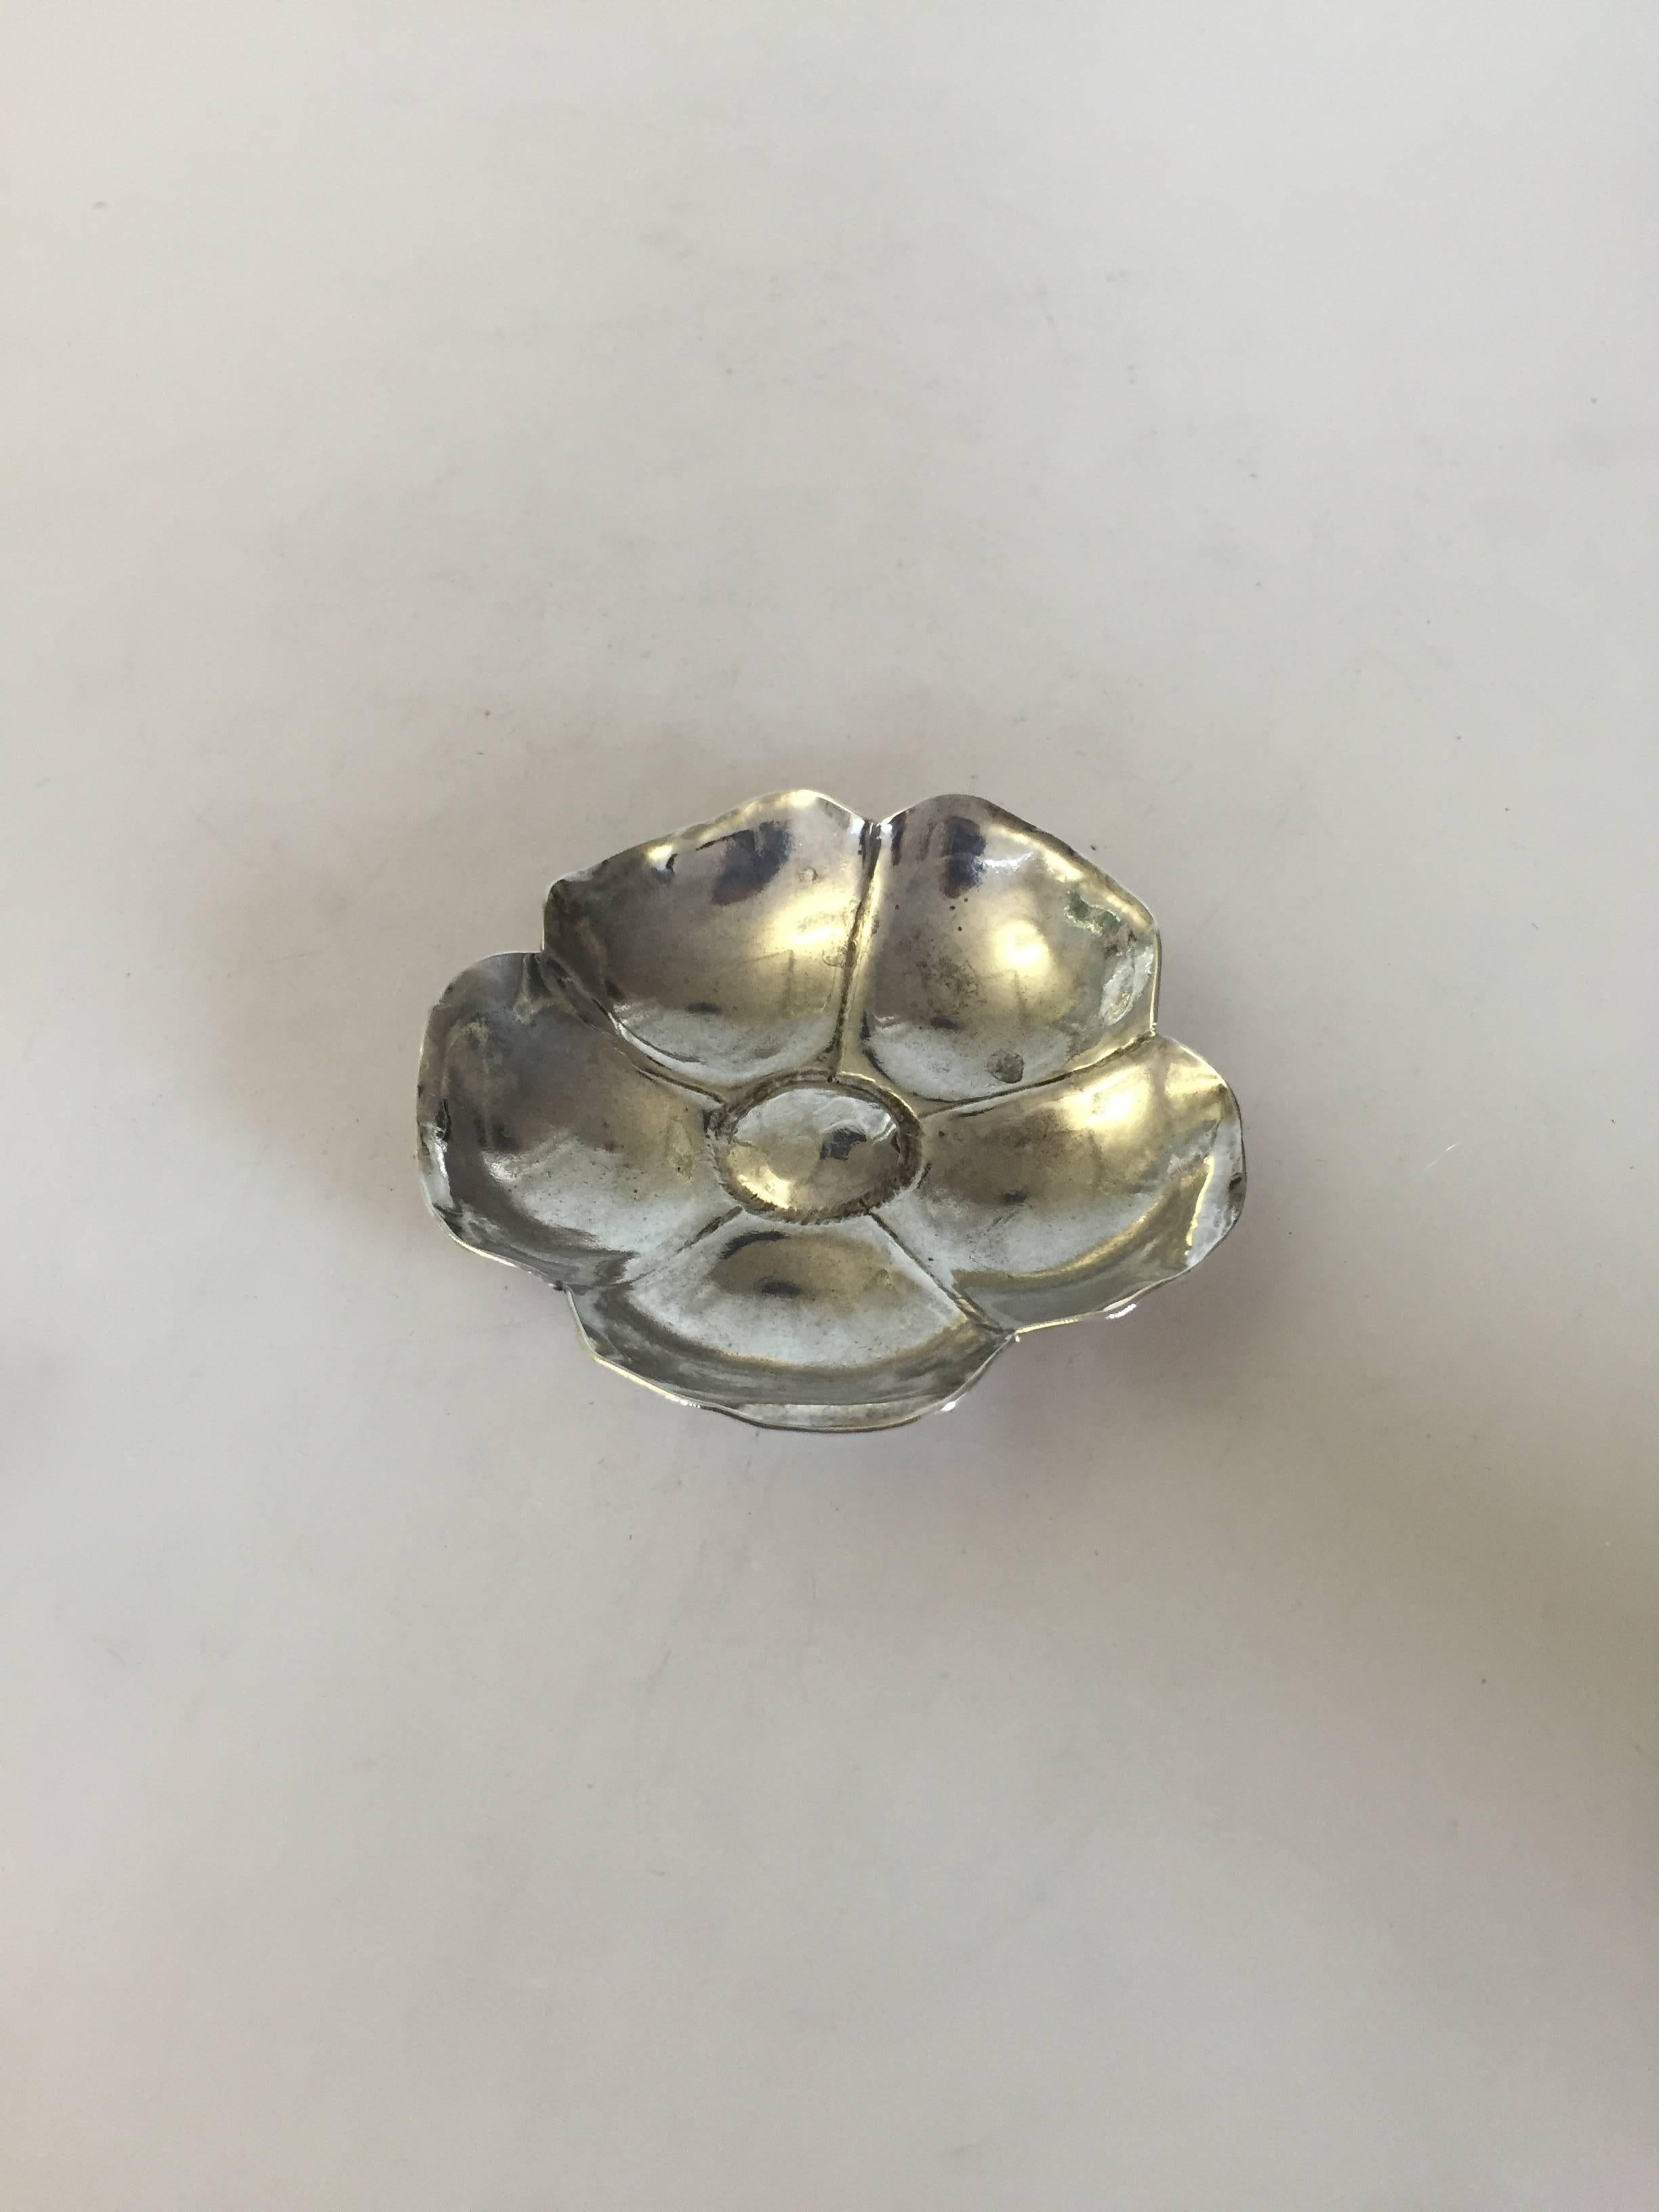 Small Silver Ashtray / Dish shaped as a flower. Weighs 32 g (1,15 oz). Diameter measures 8 cm (3 5/32